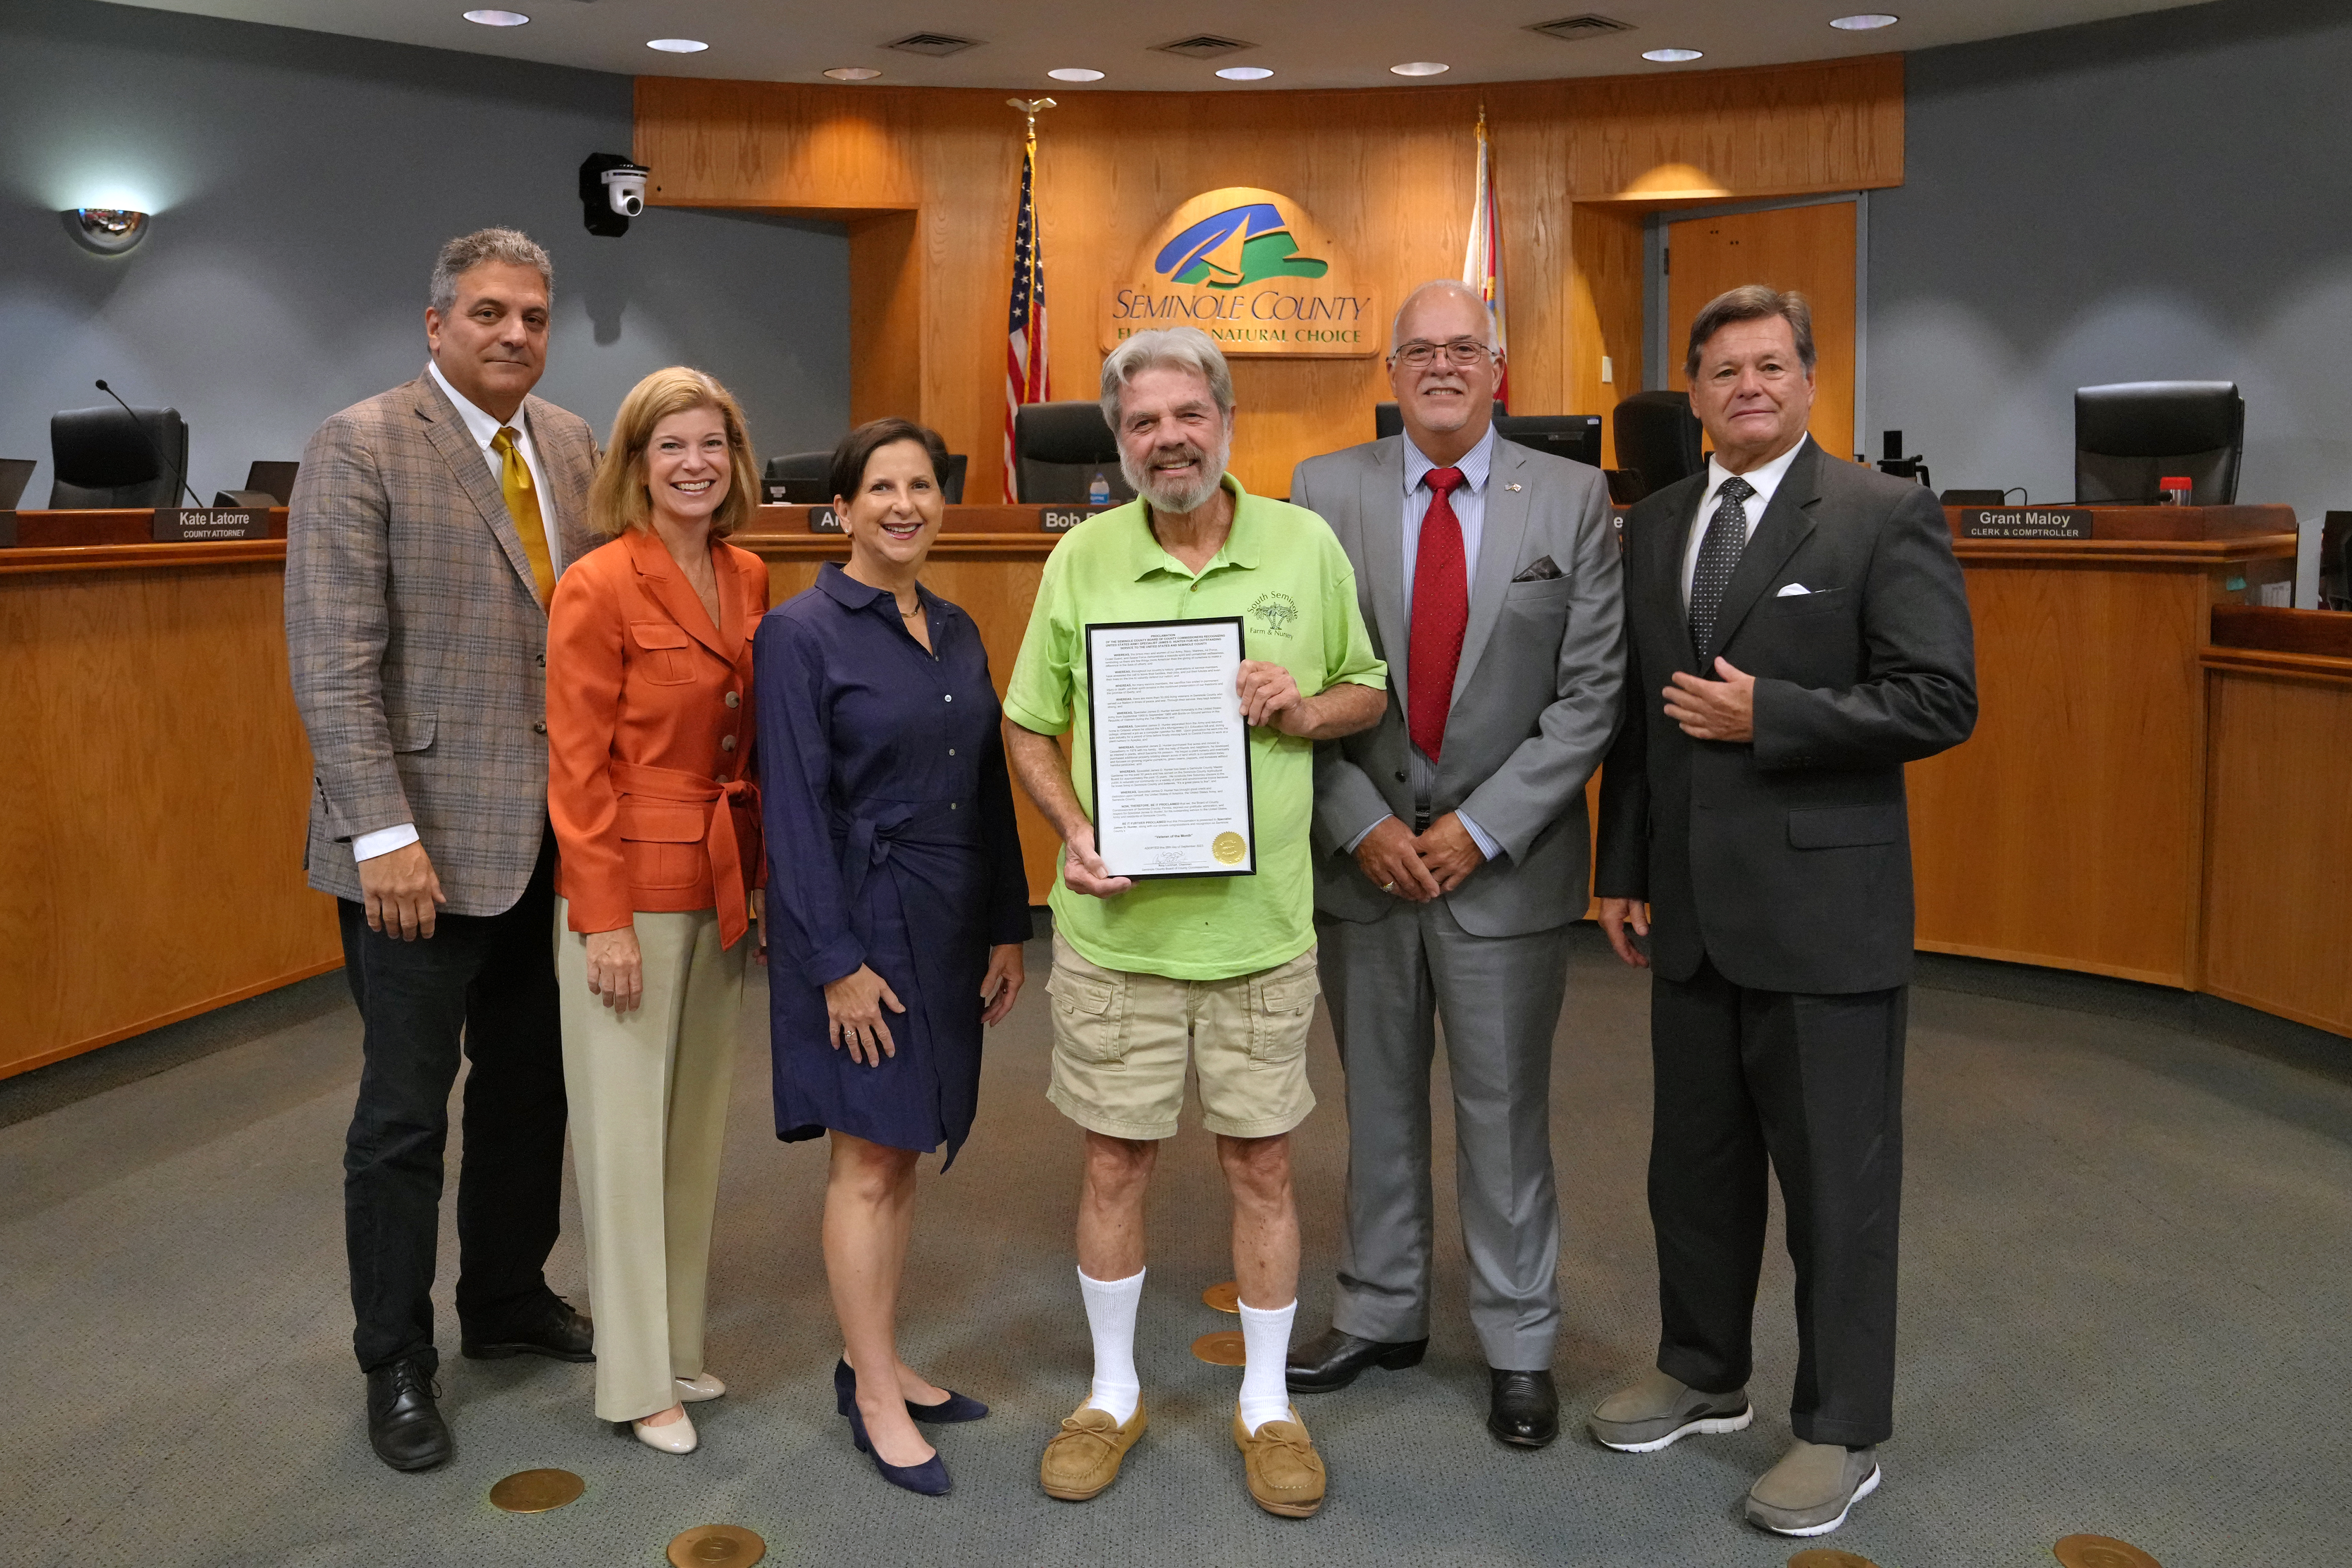 Proclamation - Proclaiming Specialist James D. Hunter, United States Army as Seminole County's September Veteran of the Month.